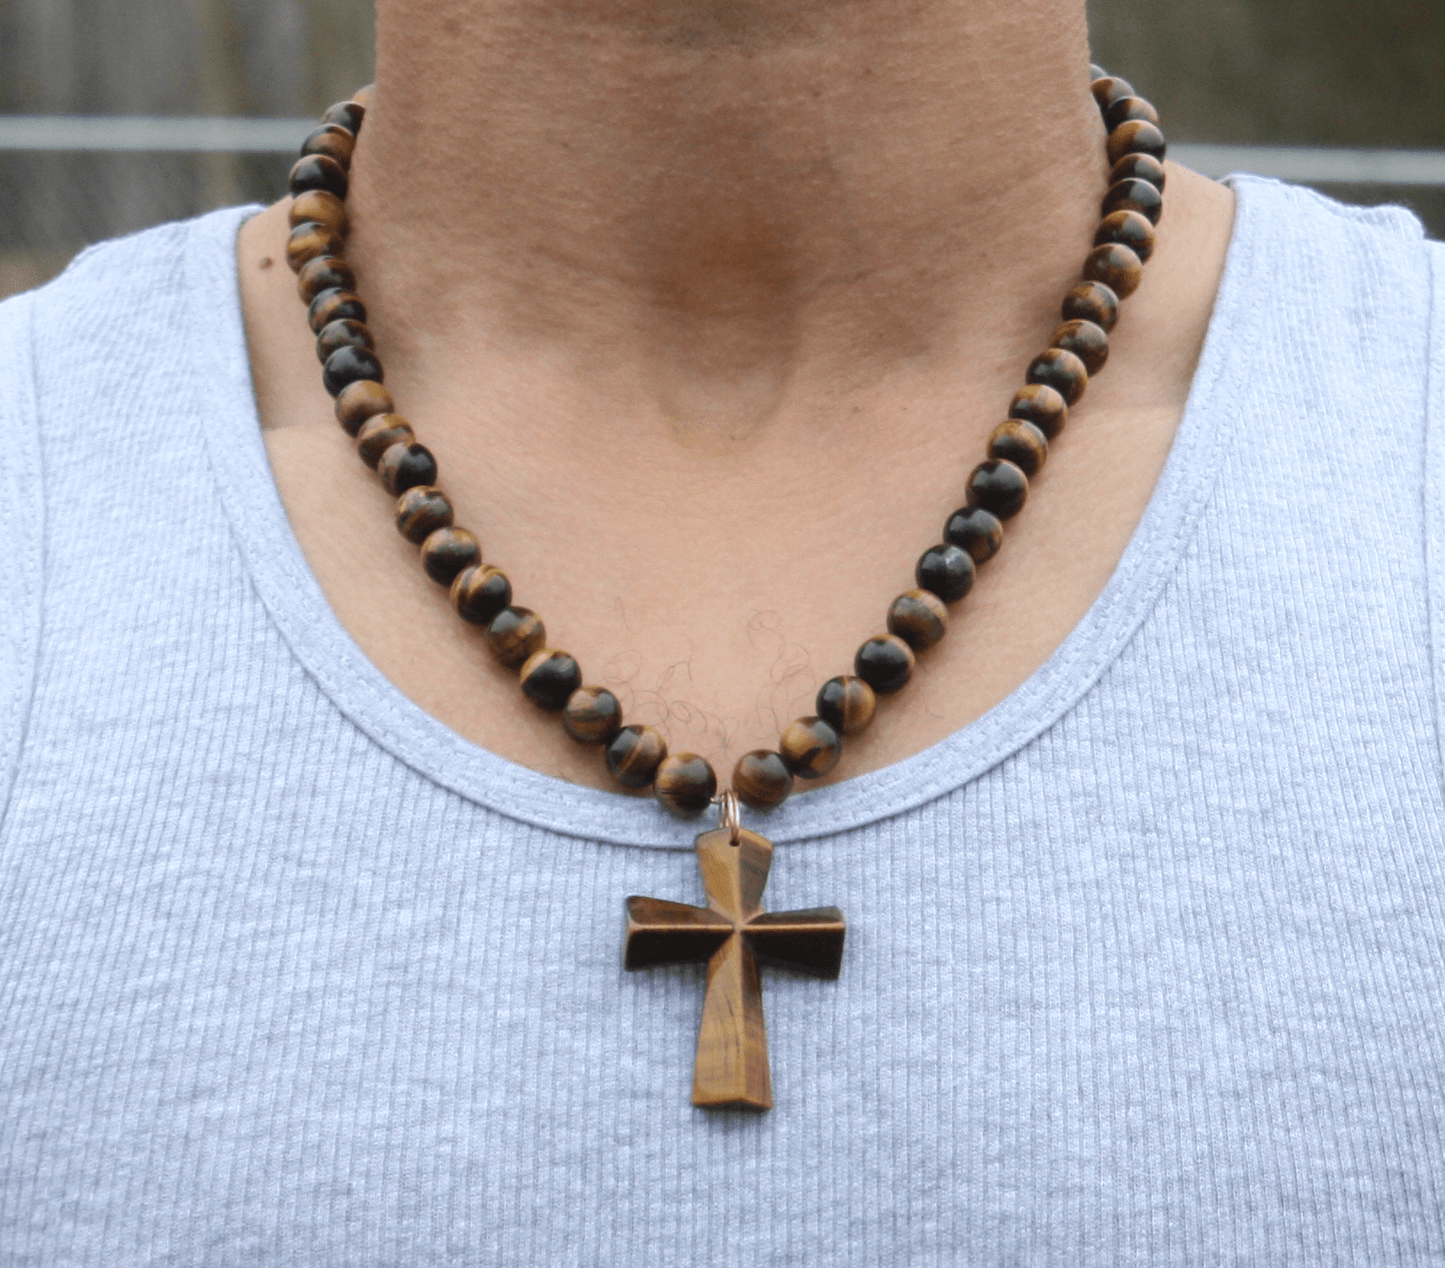 Genuine Tigers Eye Necklace with TIgers Eye Cross - Gift for Men/Woman - Spiritual Accessories - Religious Symbol